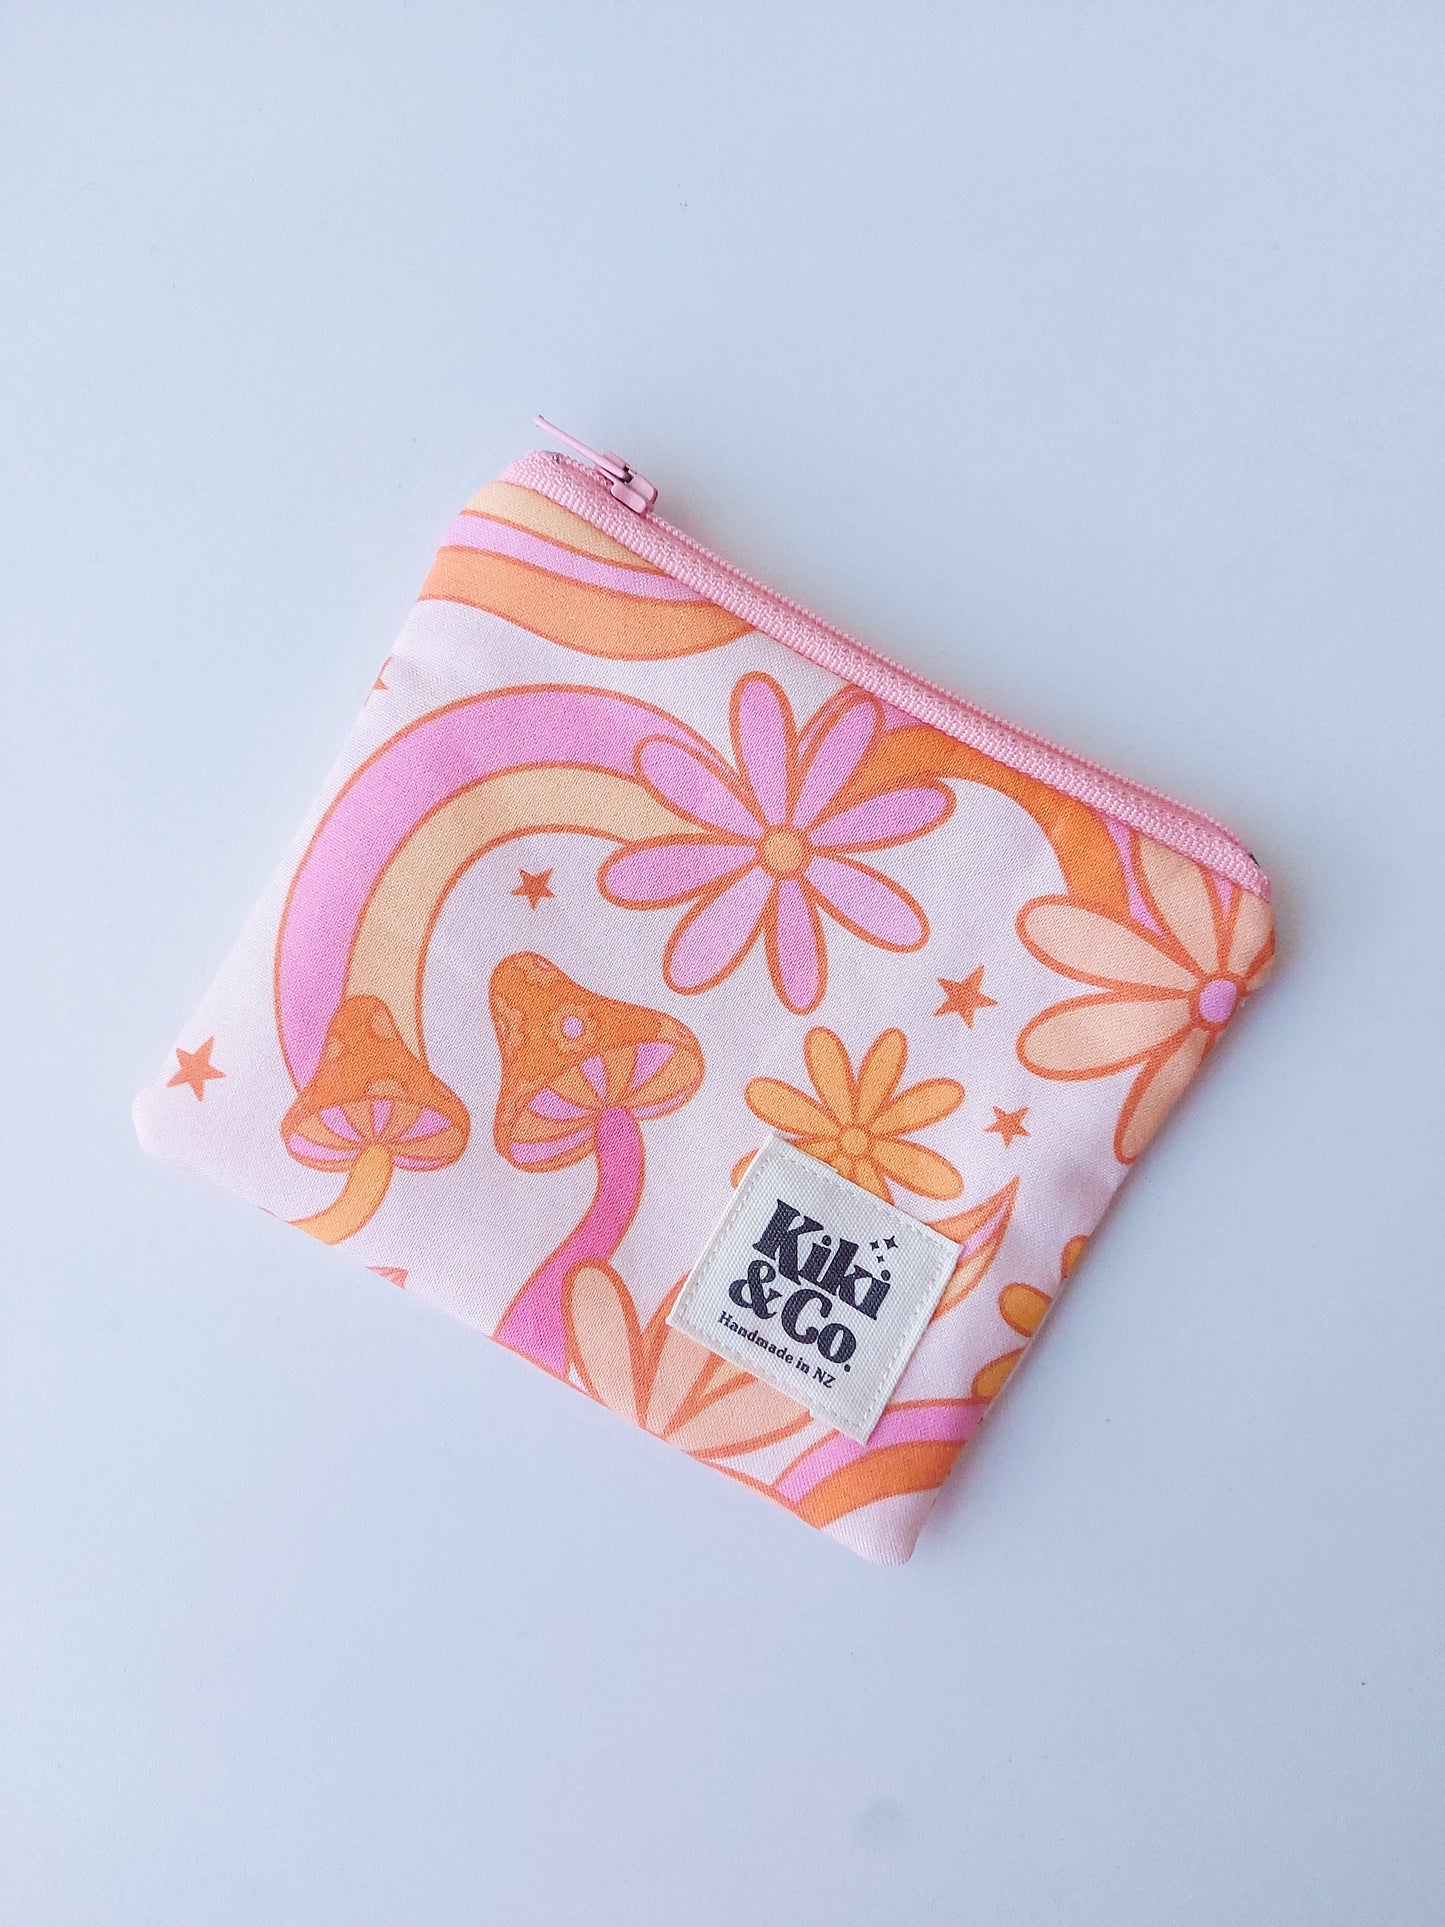 NEW Zipper Pouch - Mushrooms & Daisies - select size